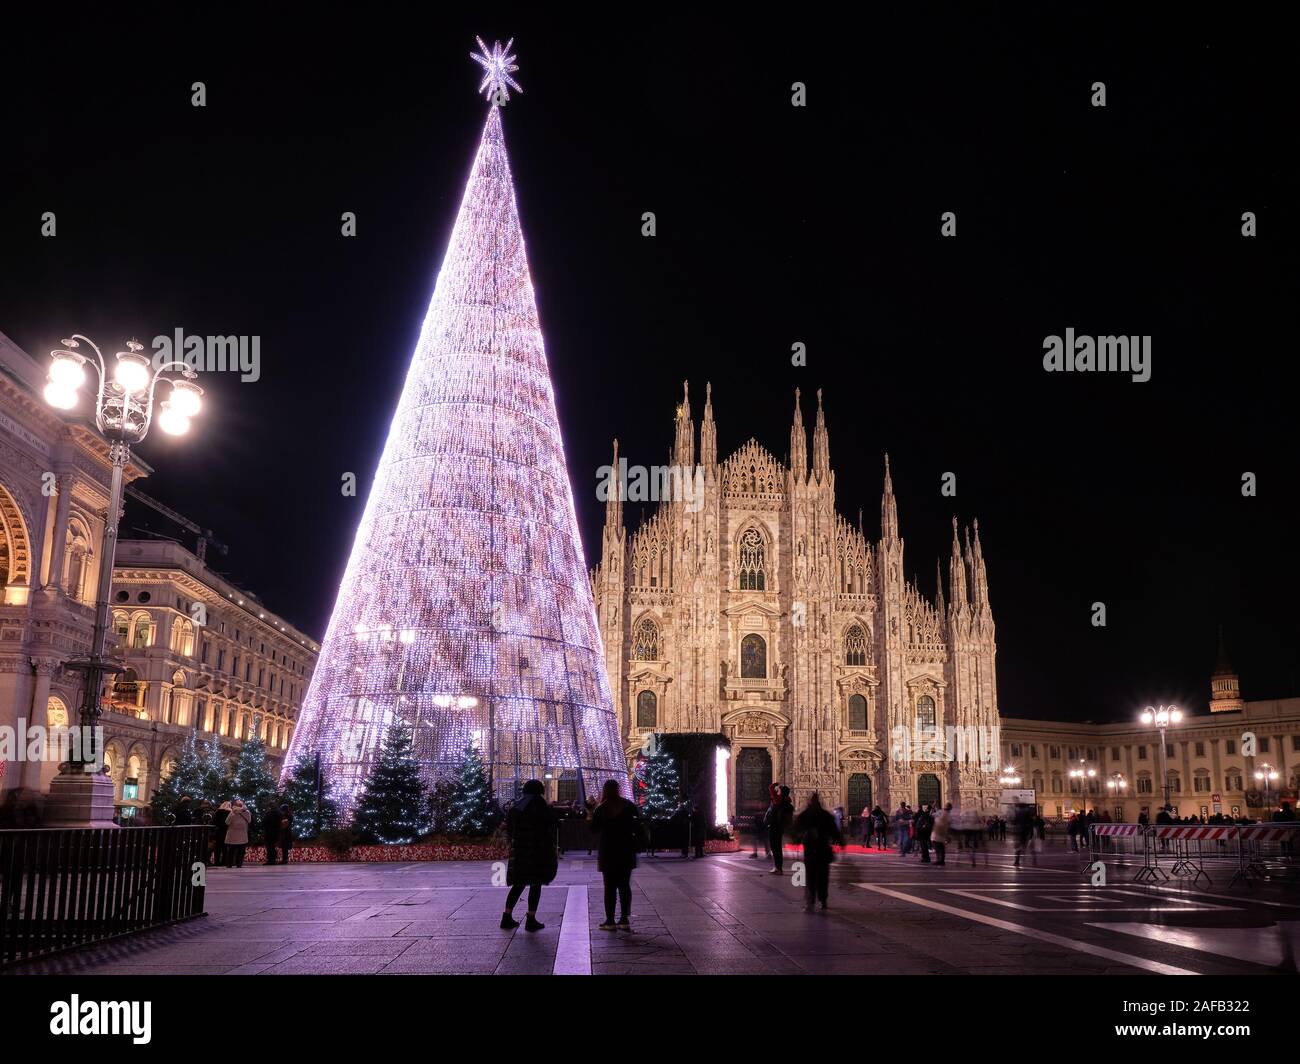 Milan, Italy - December 10 2019: Artificial Christmas tree in front of Milan cathedral, Duomo square in december, night view. Stock Photo